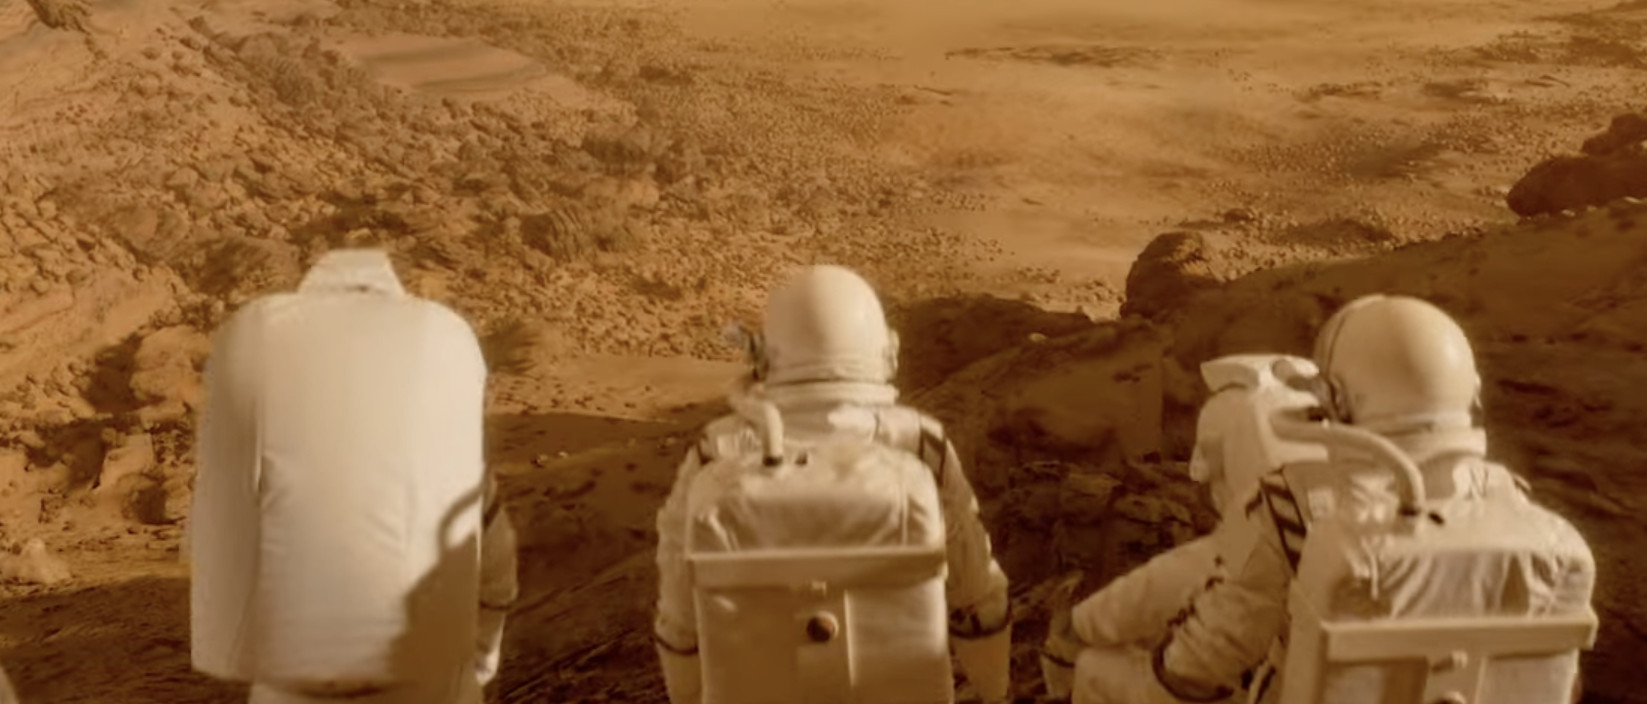 Three astronauts look out at the Mars terrain in the For All Mankind season 3 trailer